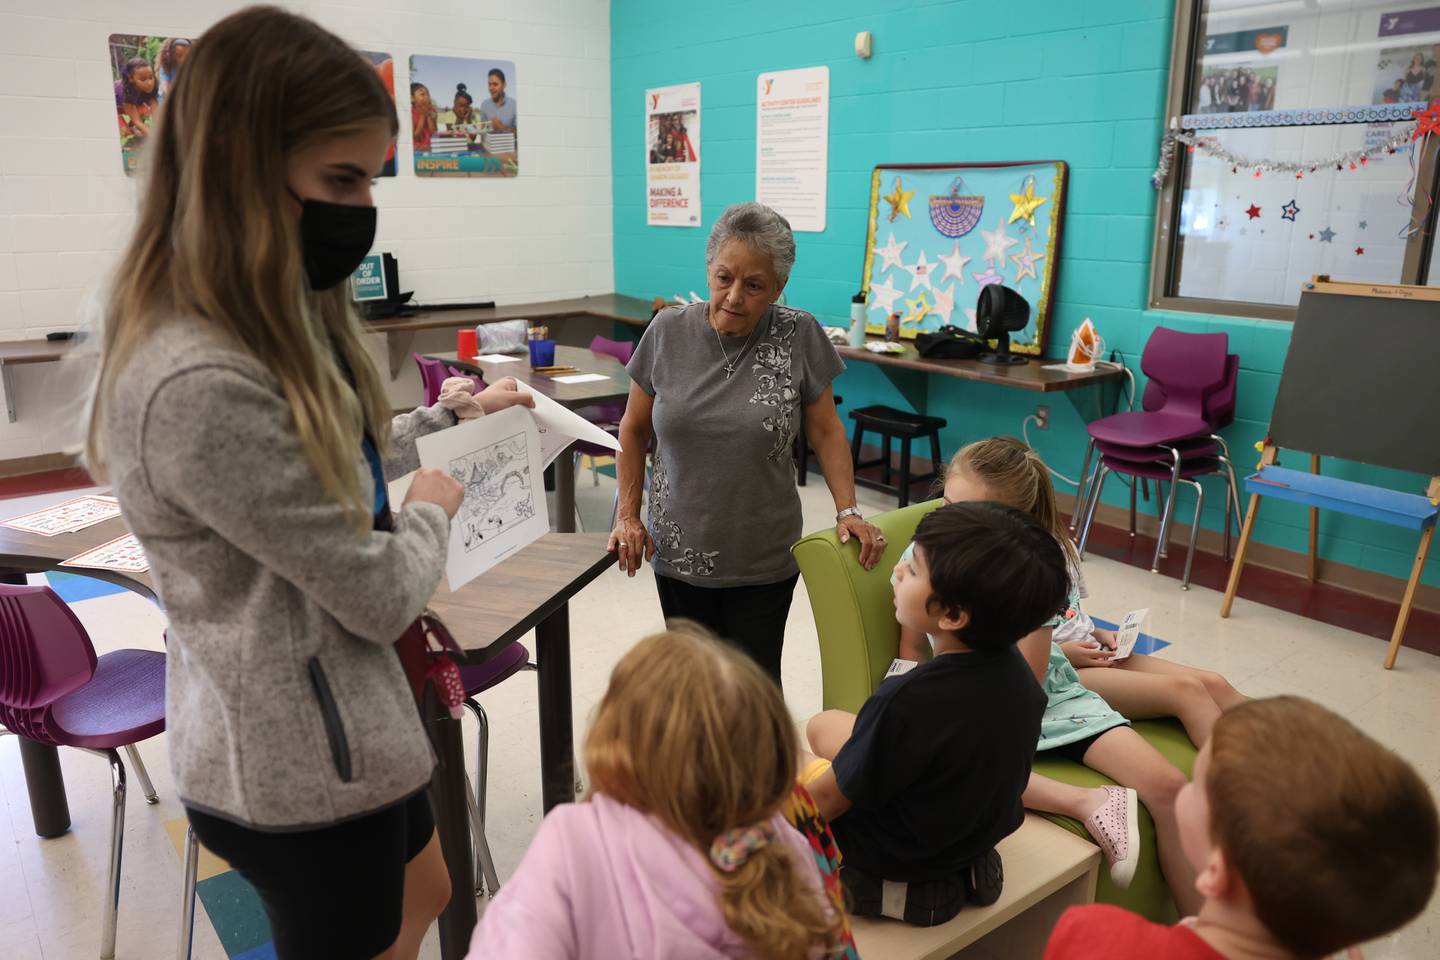 Volunteer Carmen Janega helps as an assistant with the summer camp at the C.W. Avery YMCA in Plainfield. Wednesday, July 20, 2022 in Plainfield.